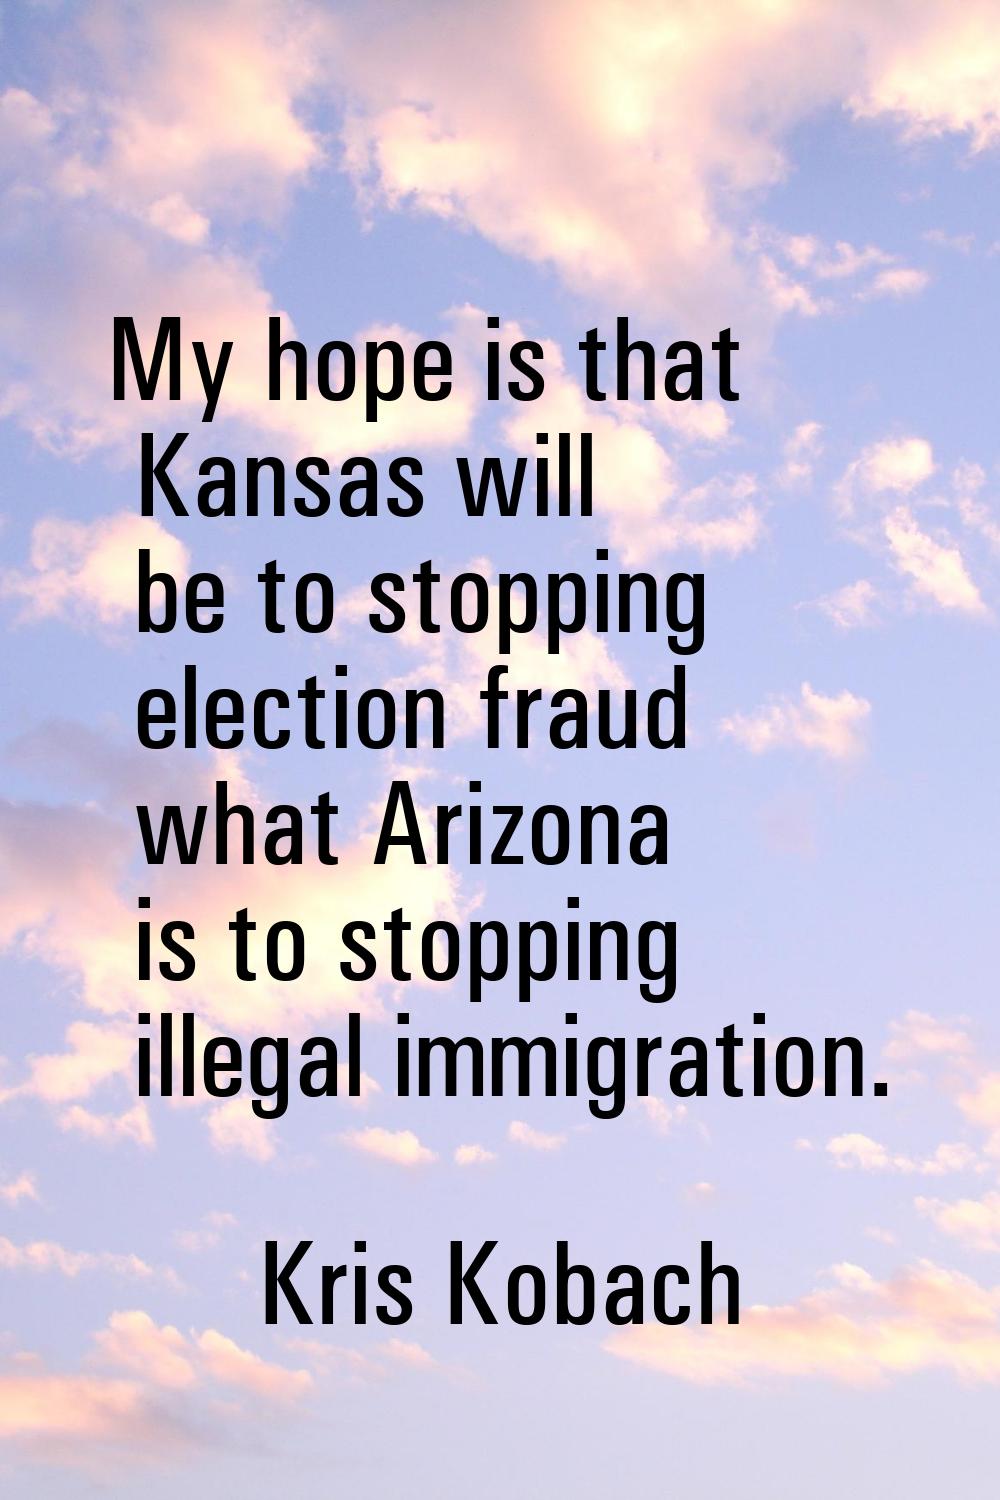 My hope is that Kansas will be to stopping election fraud what Arizona is to stopping illegal immig